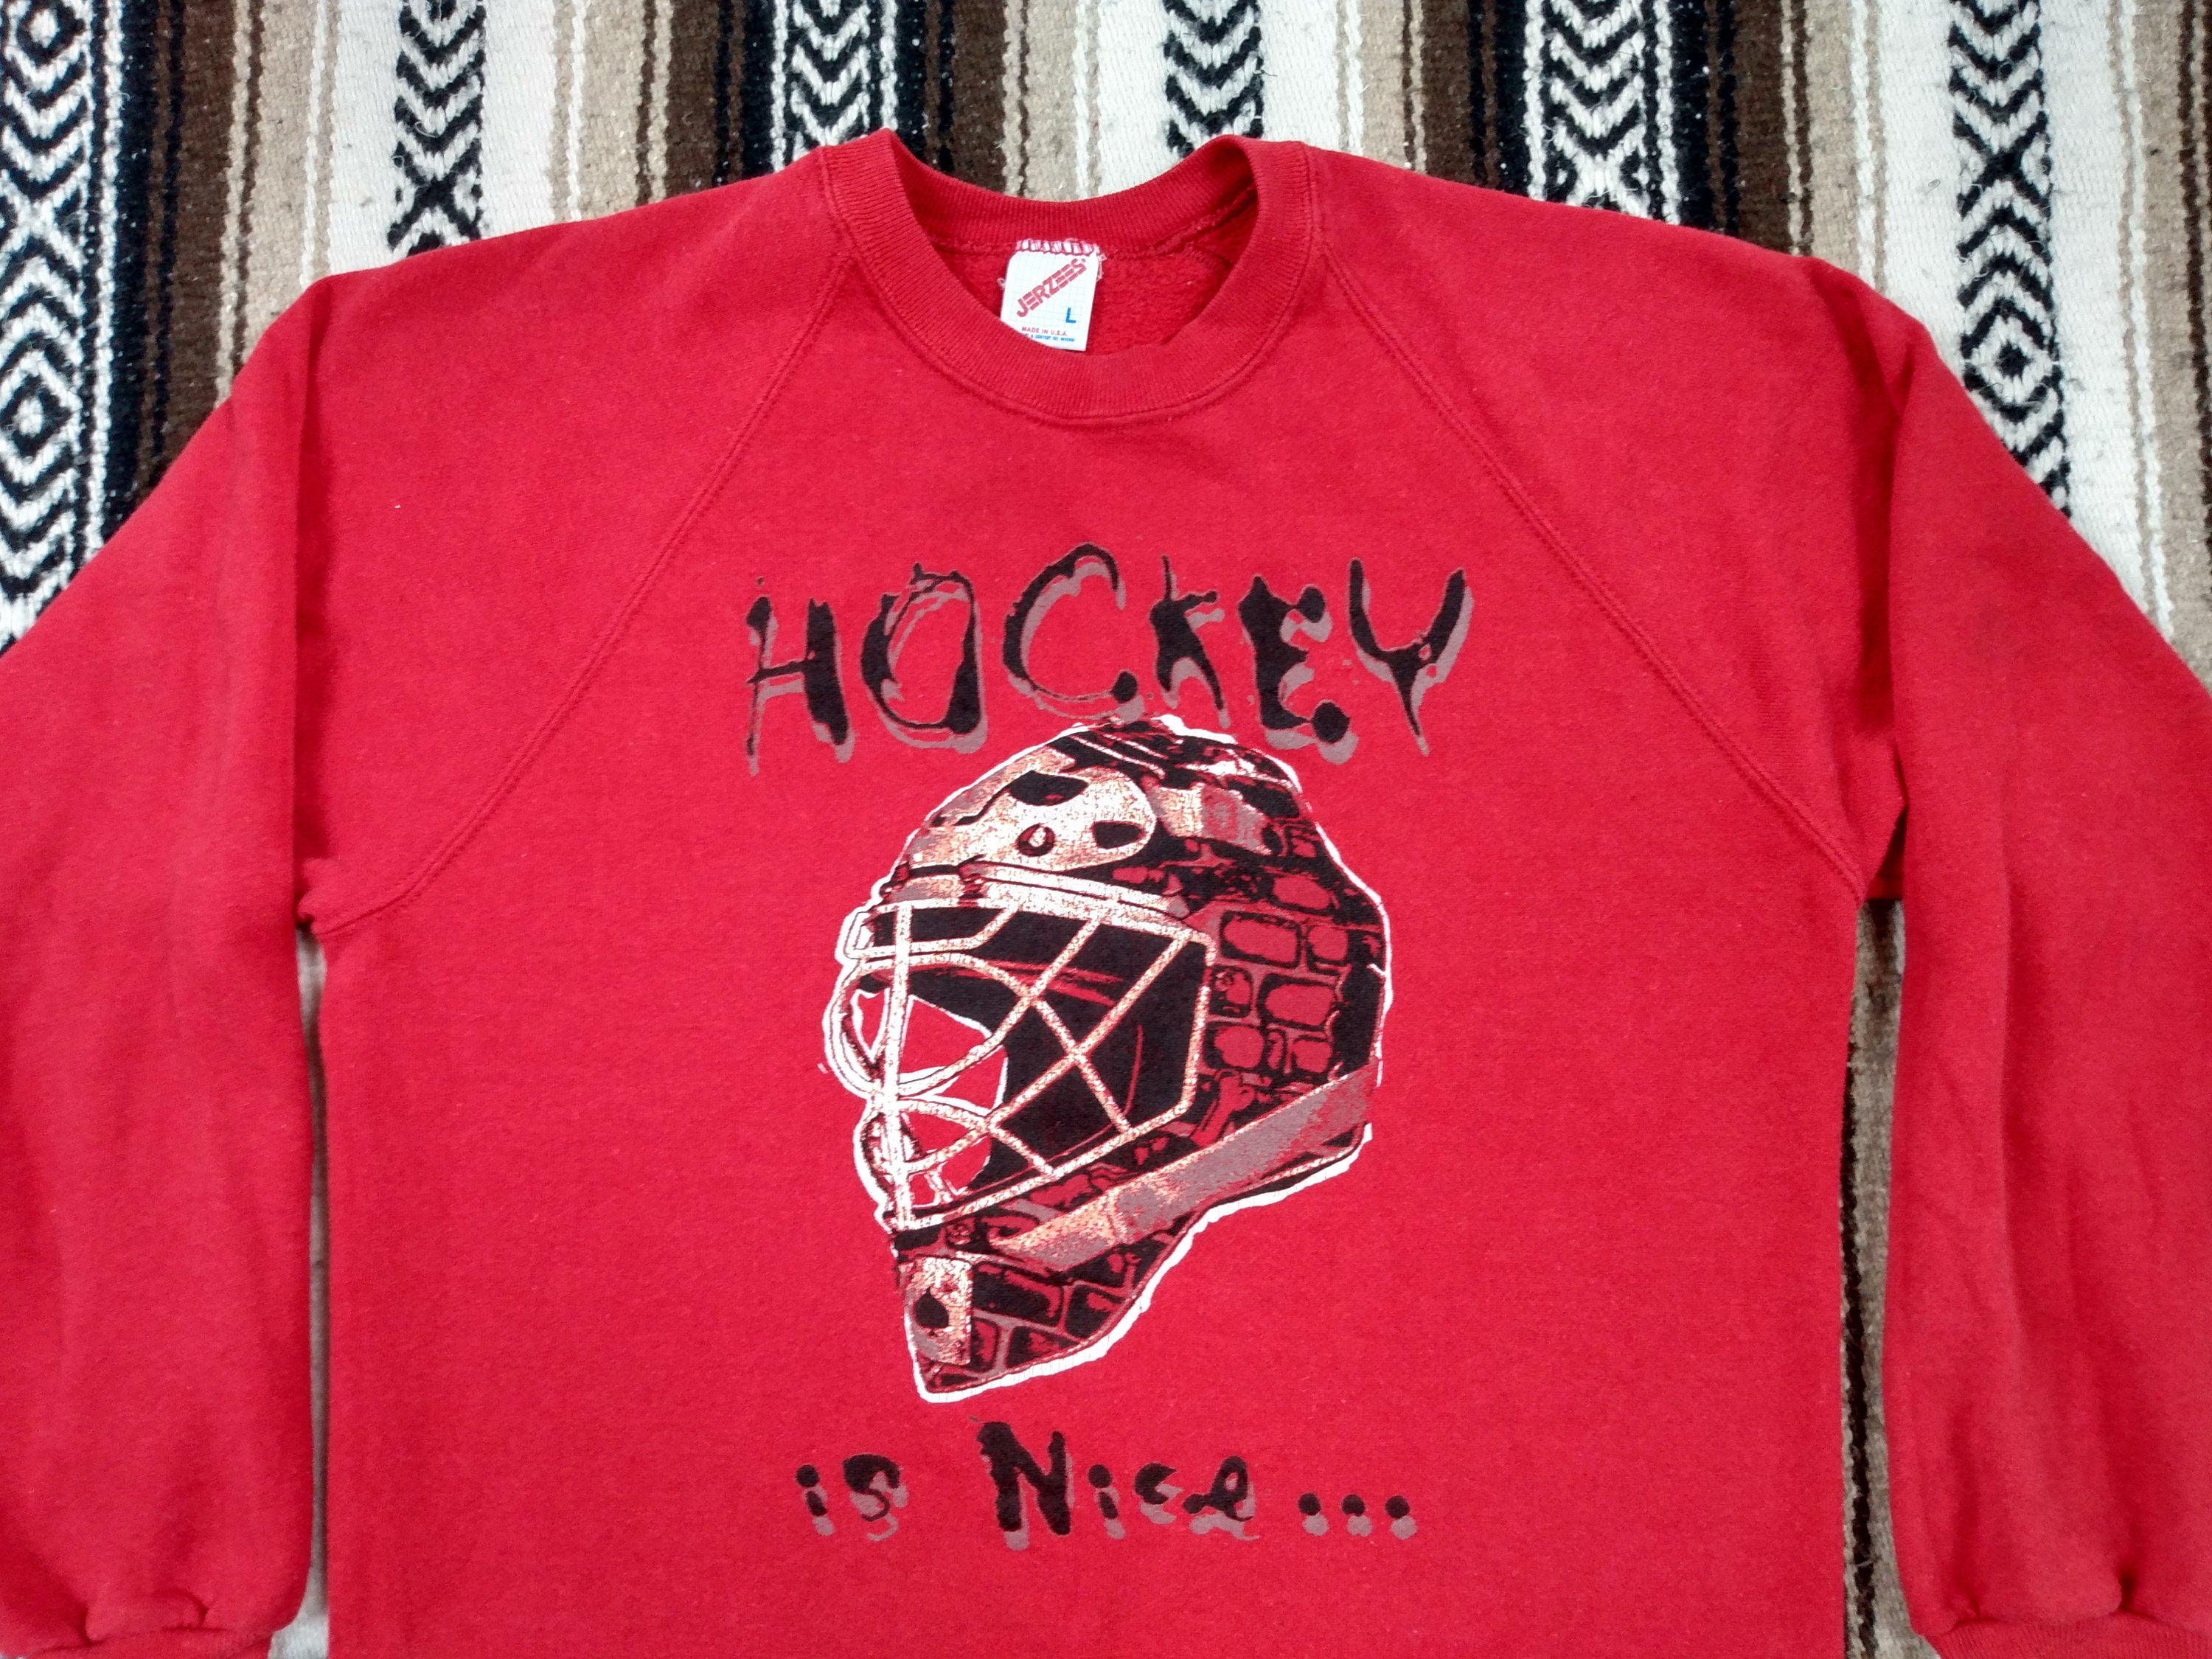 Pin by Big Daddy on Chicago Blackhawks Goalies  Blackhawks hockey, Hockey  goalie, Goalie mask